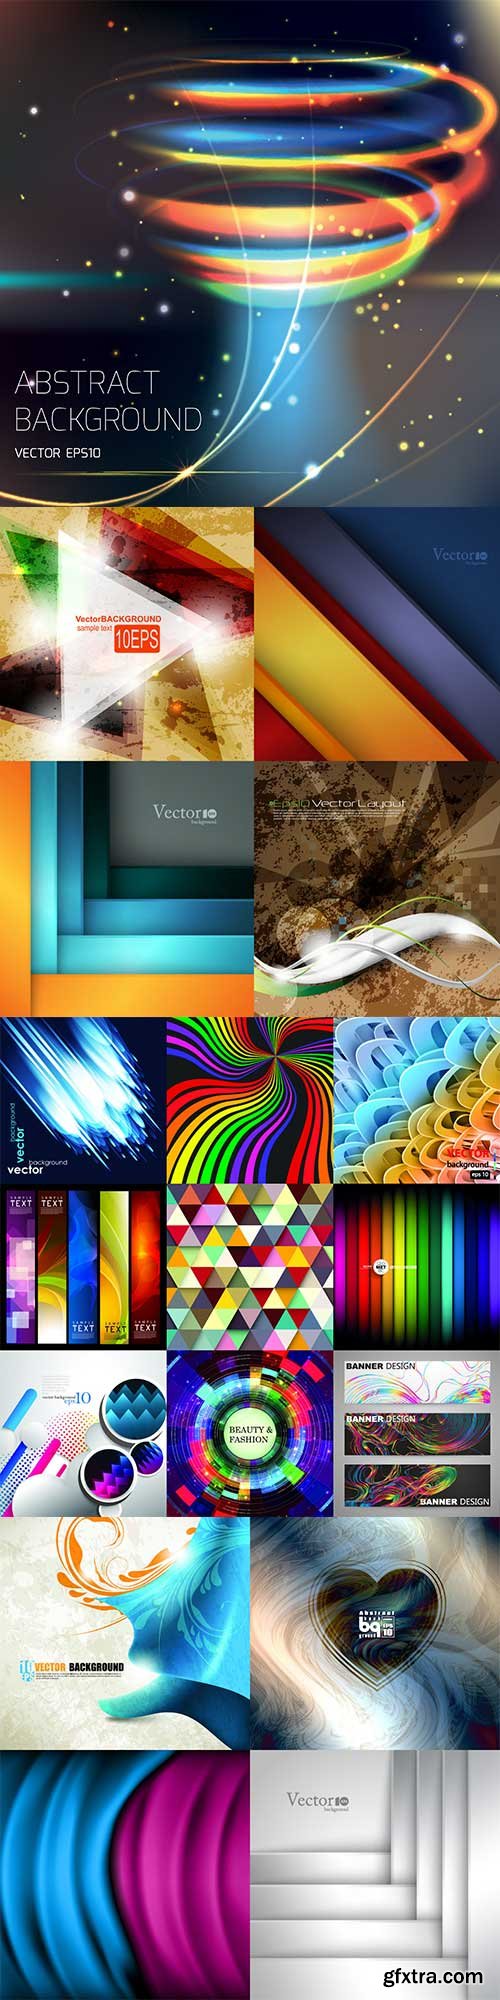 Bright colorful abstract backgrounds vector - 84